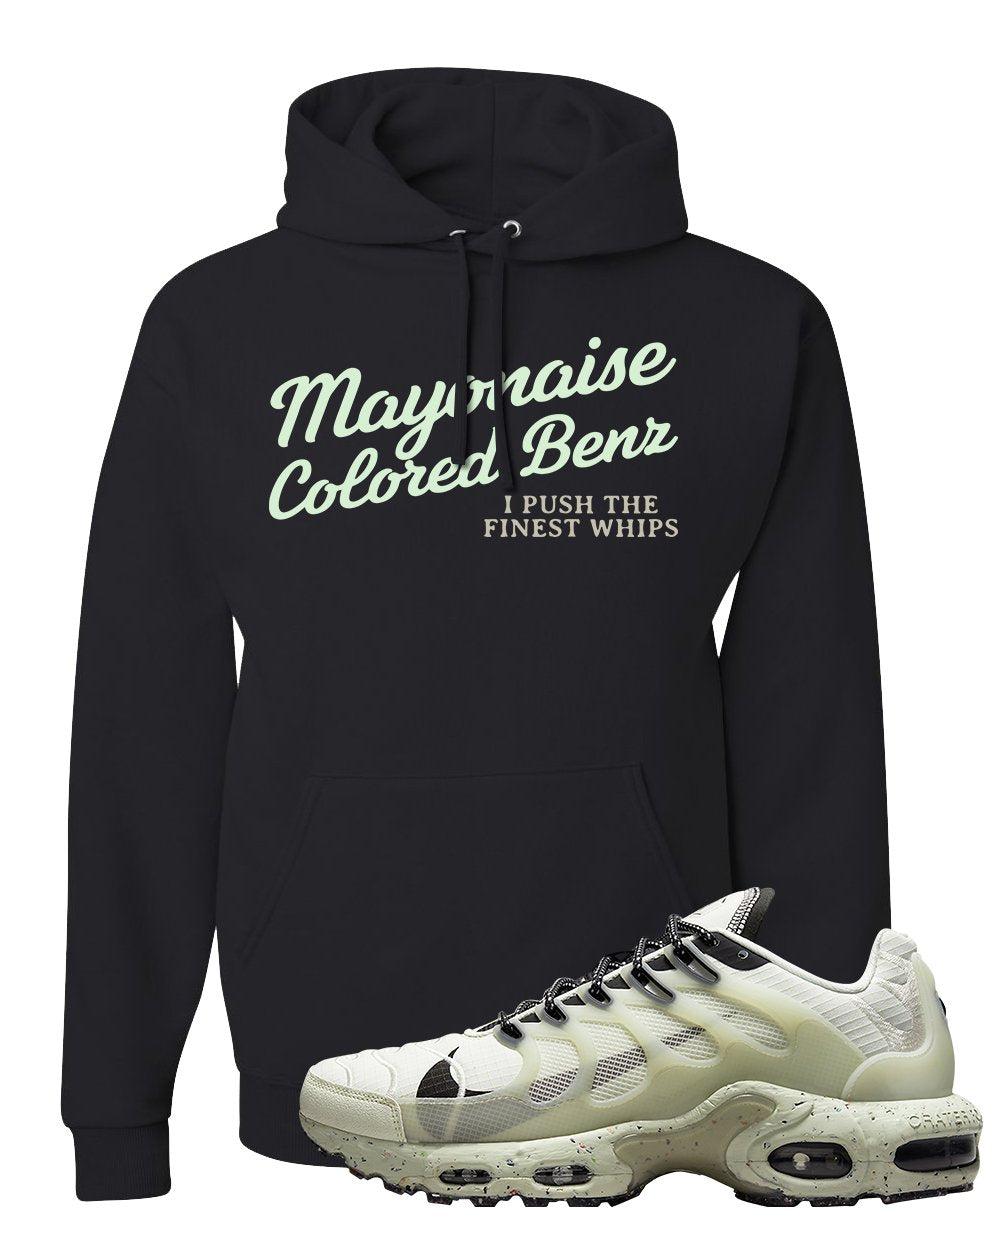 Terrascape Light Bone Pluses Hoodie | Mayonaise Colored Benz, Black